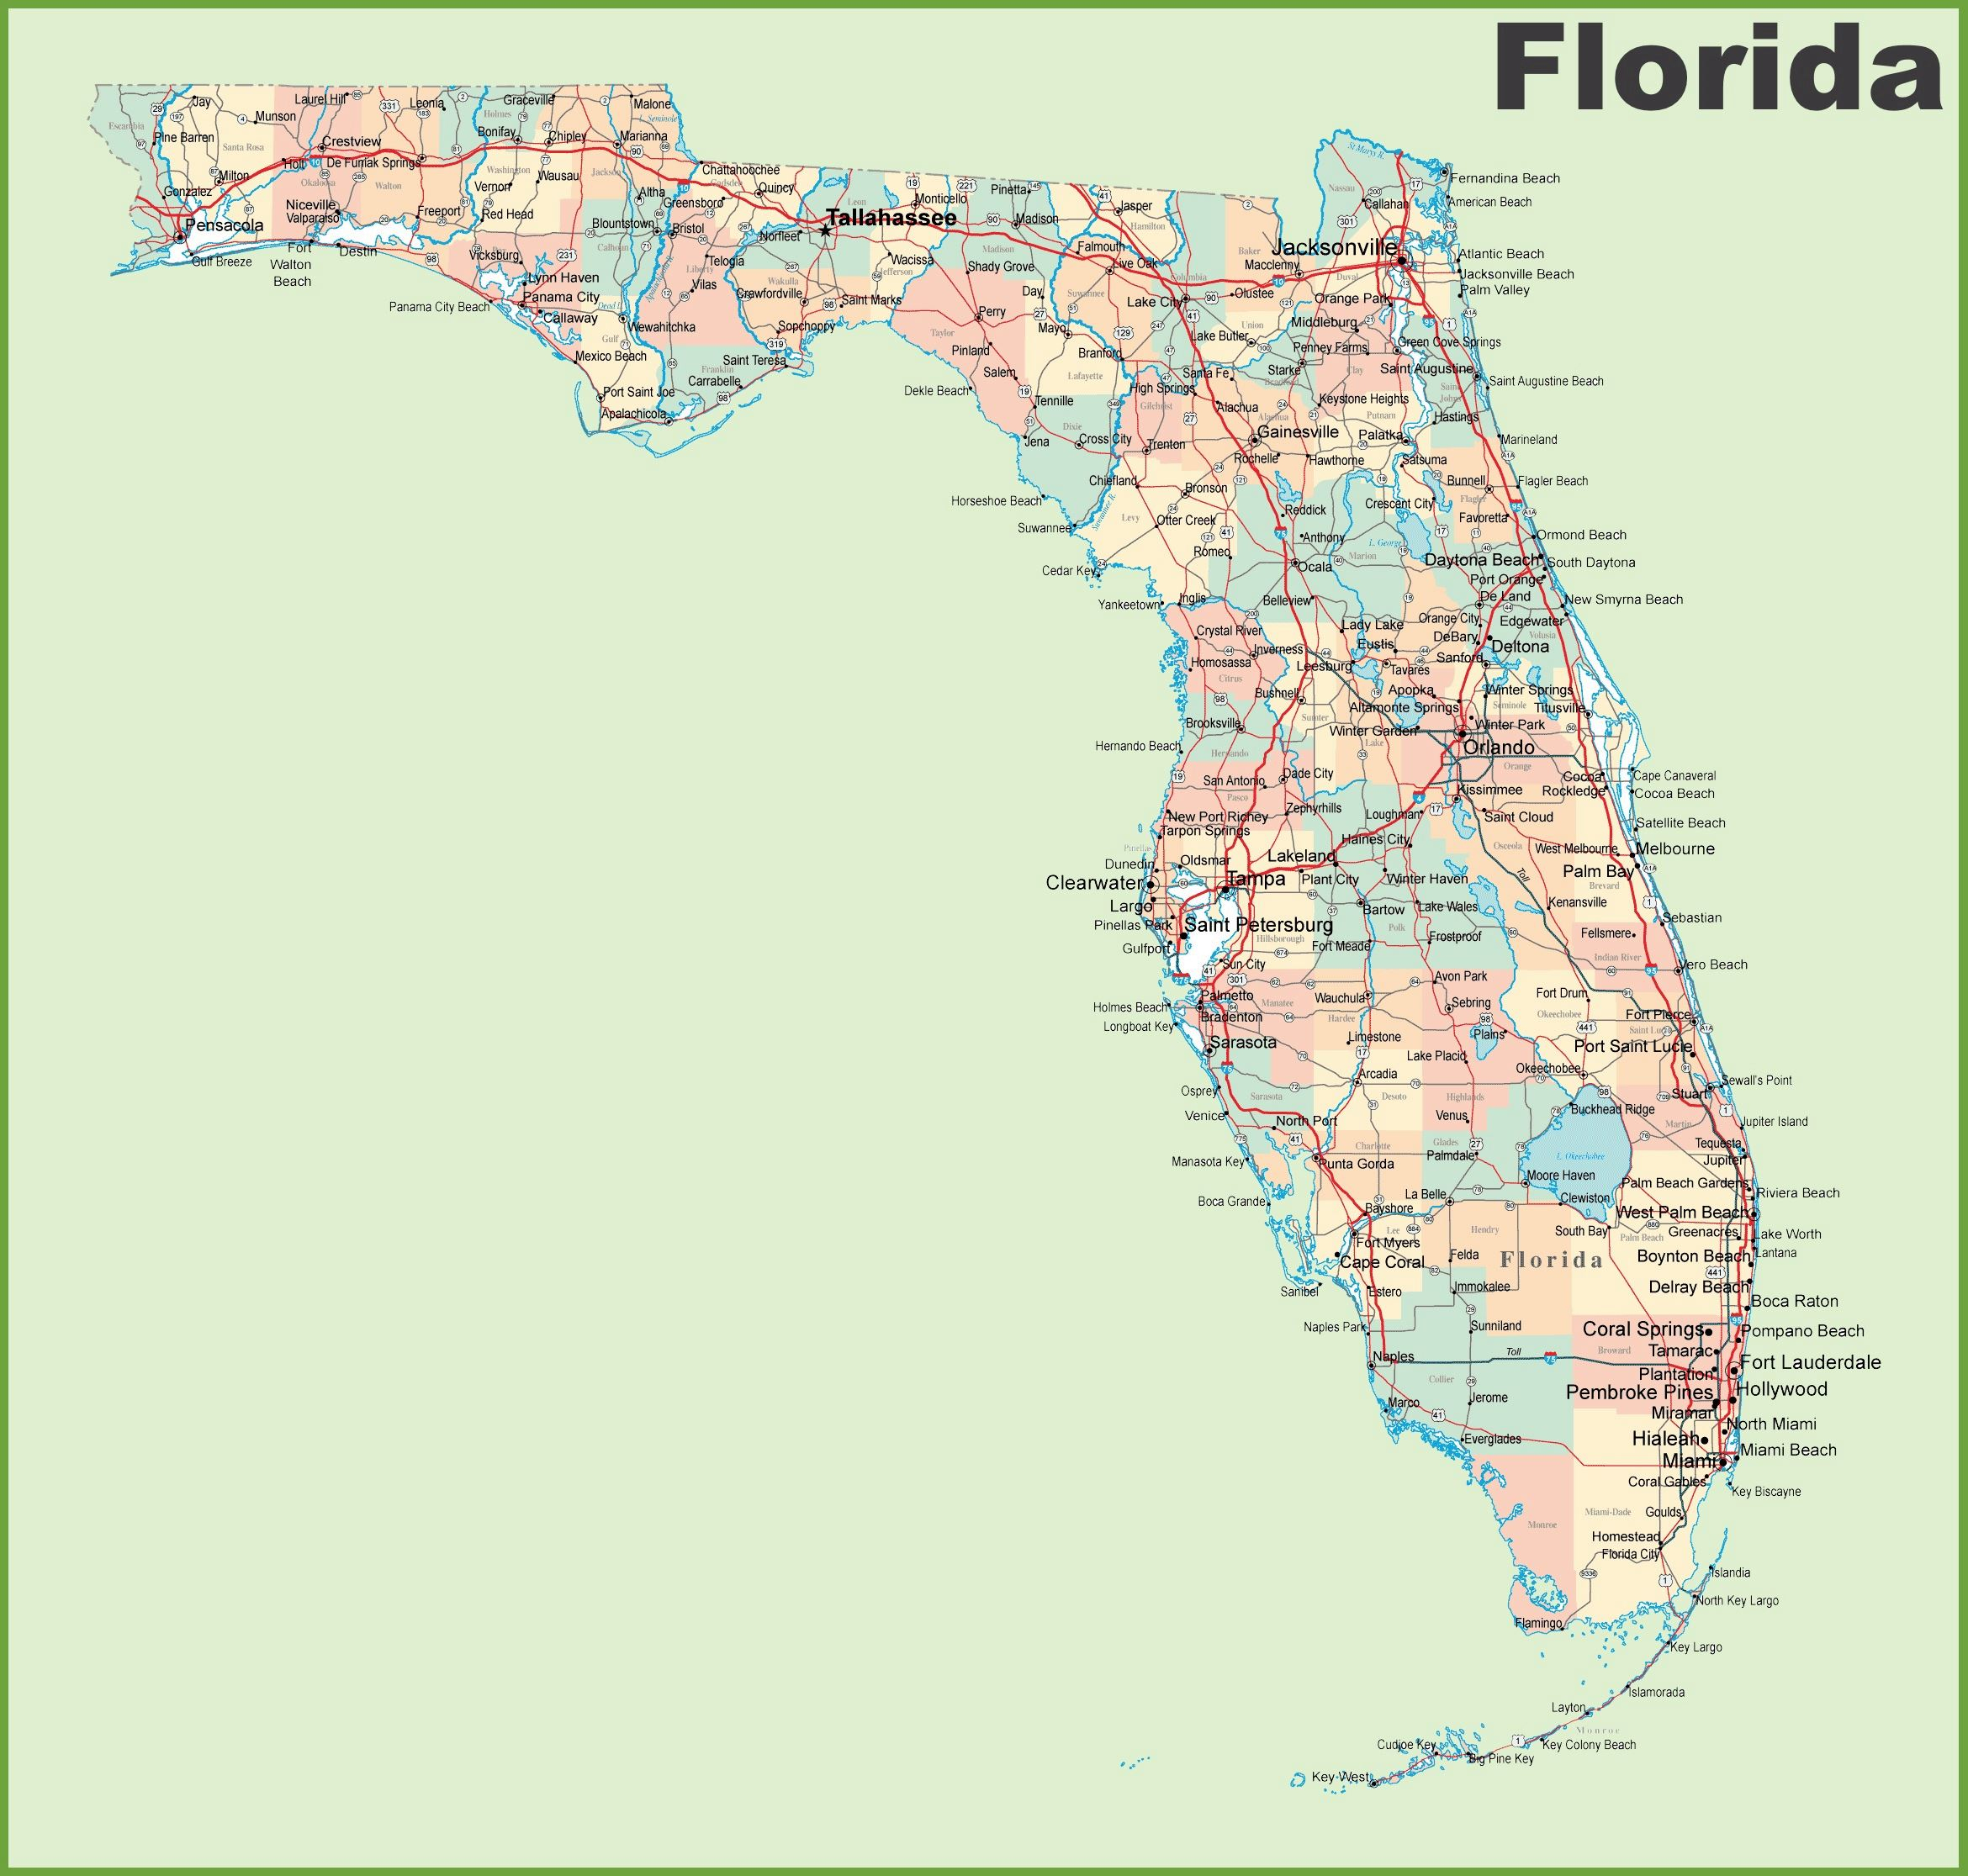 Large Florida Maps For Free Download And Print | High-Resolution And - Deland Florida Map